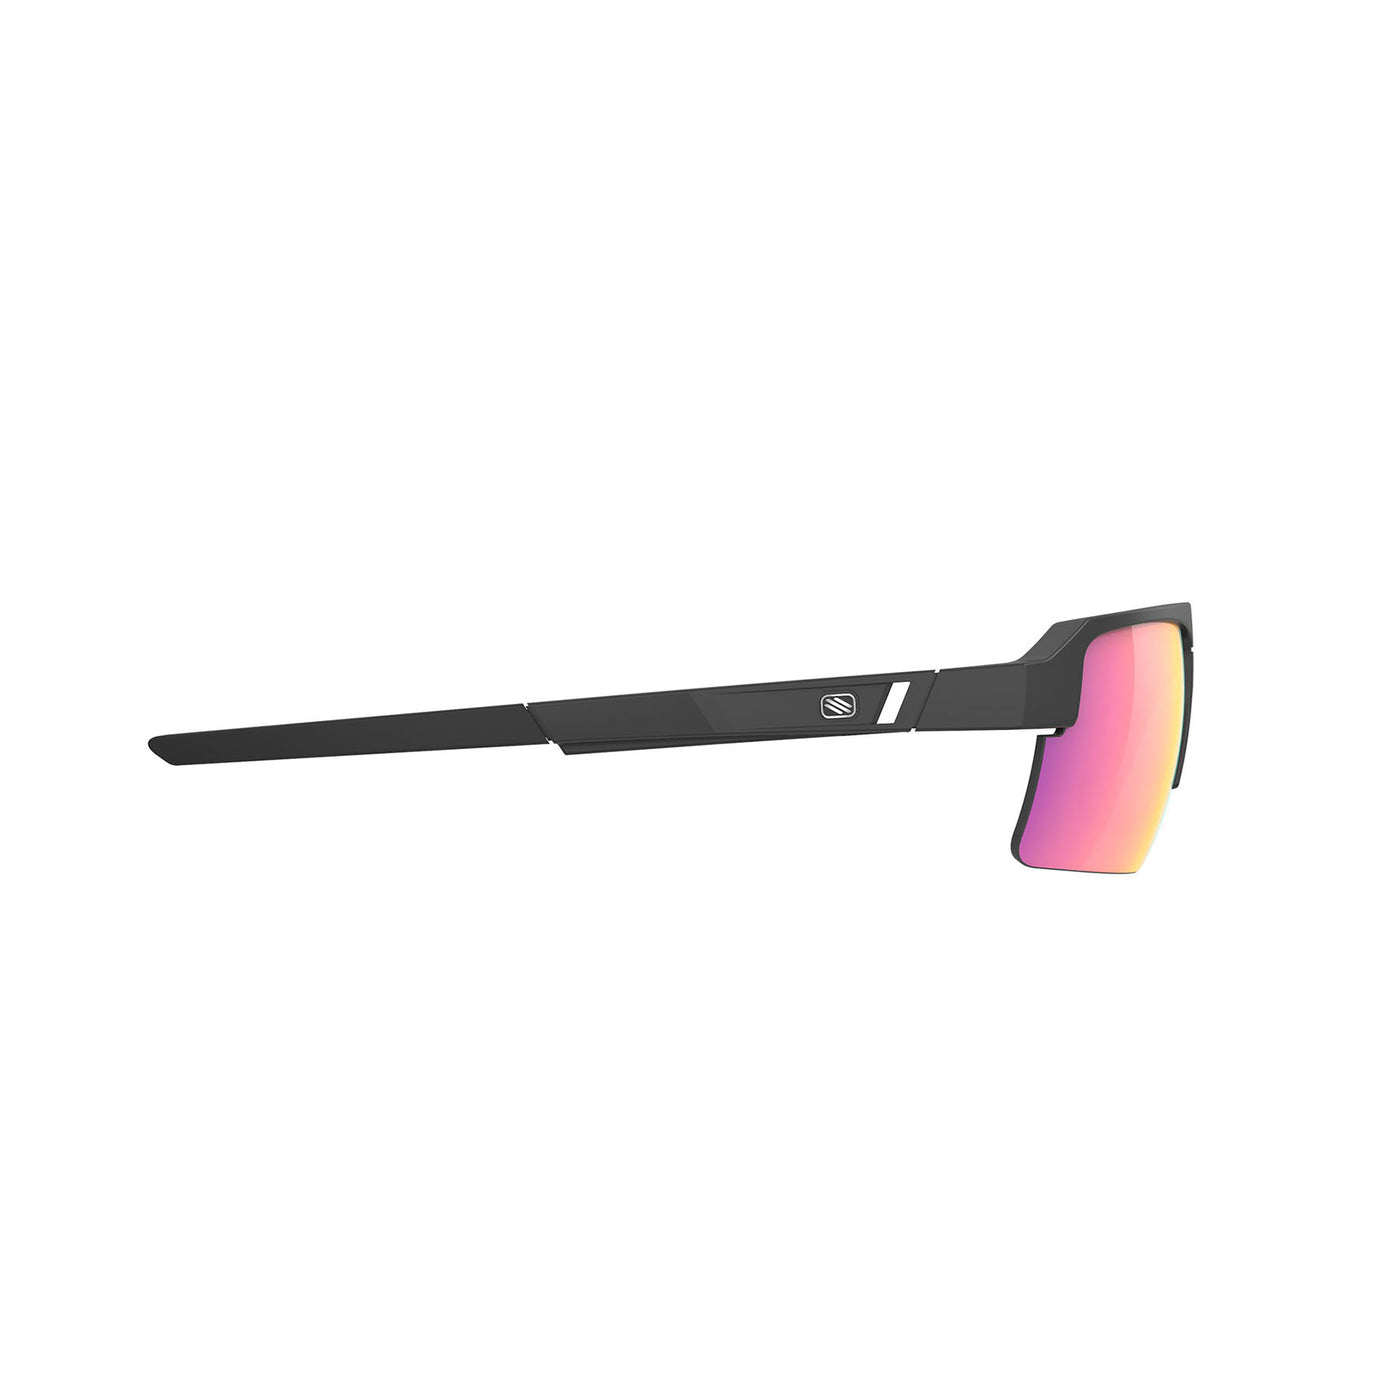 Rudy Project Sirius high-performance sport prescription sunglasses great for running, cycling, gravel biking, mountain biking, golf, tennis and pickleball#color_sirius-matte-black-with-multilaser-sunset-lenses